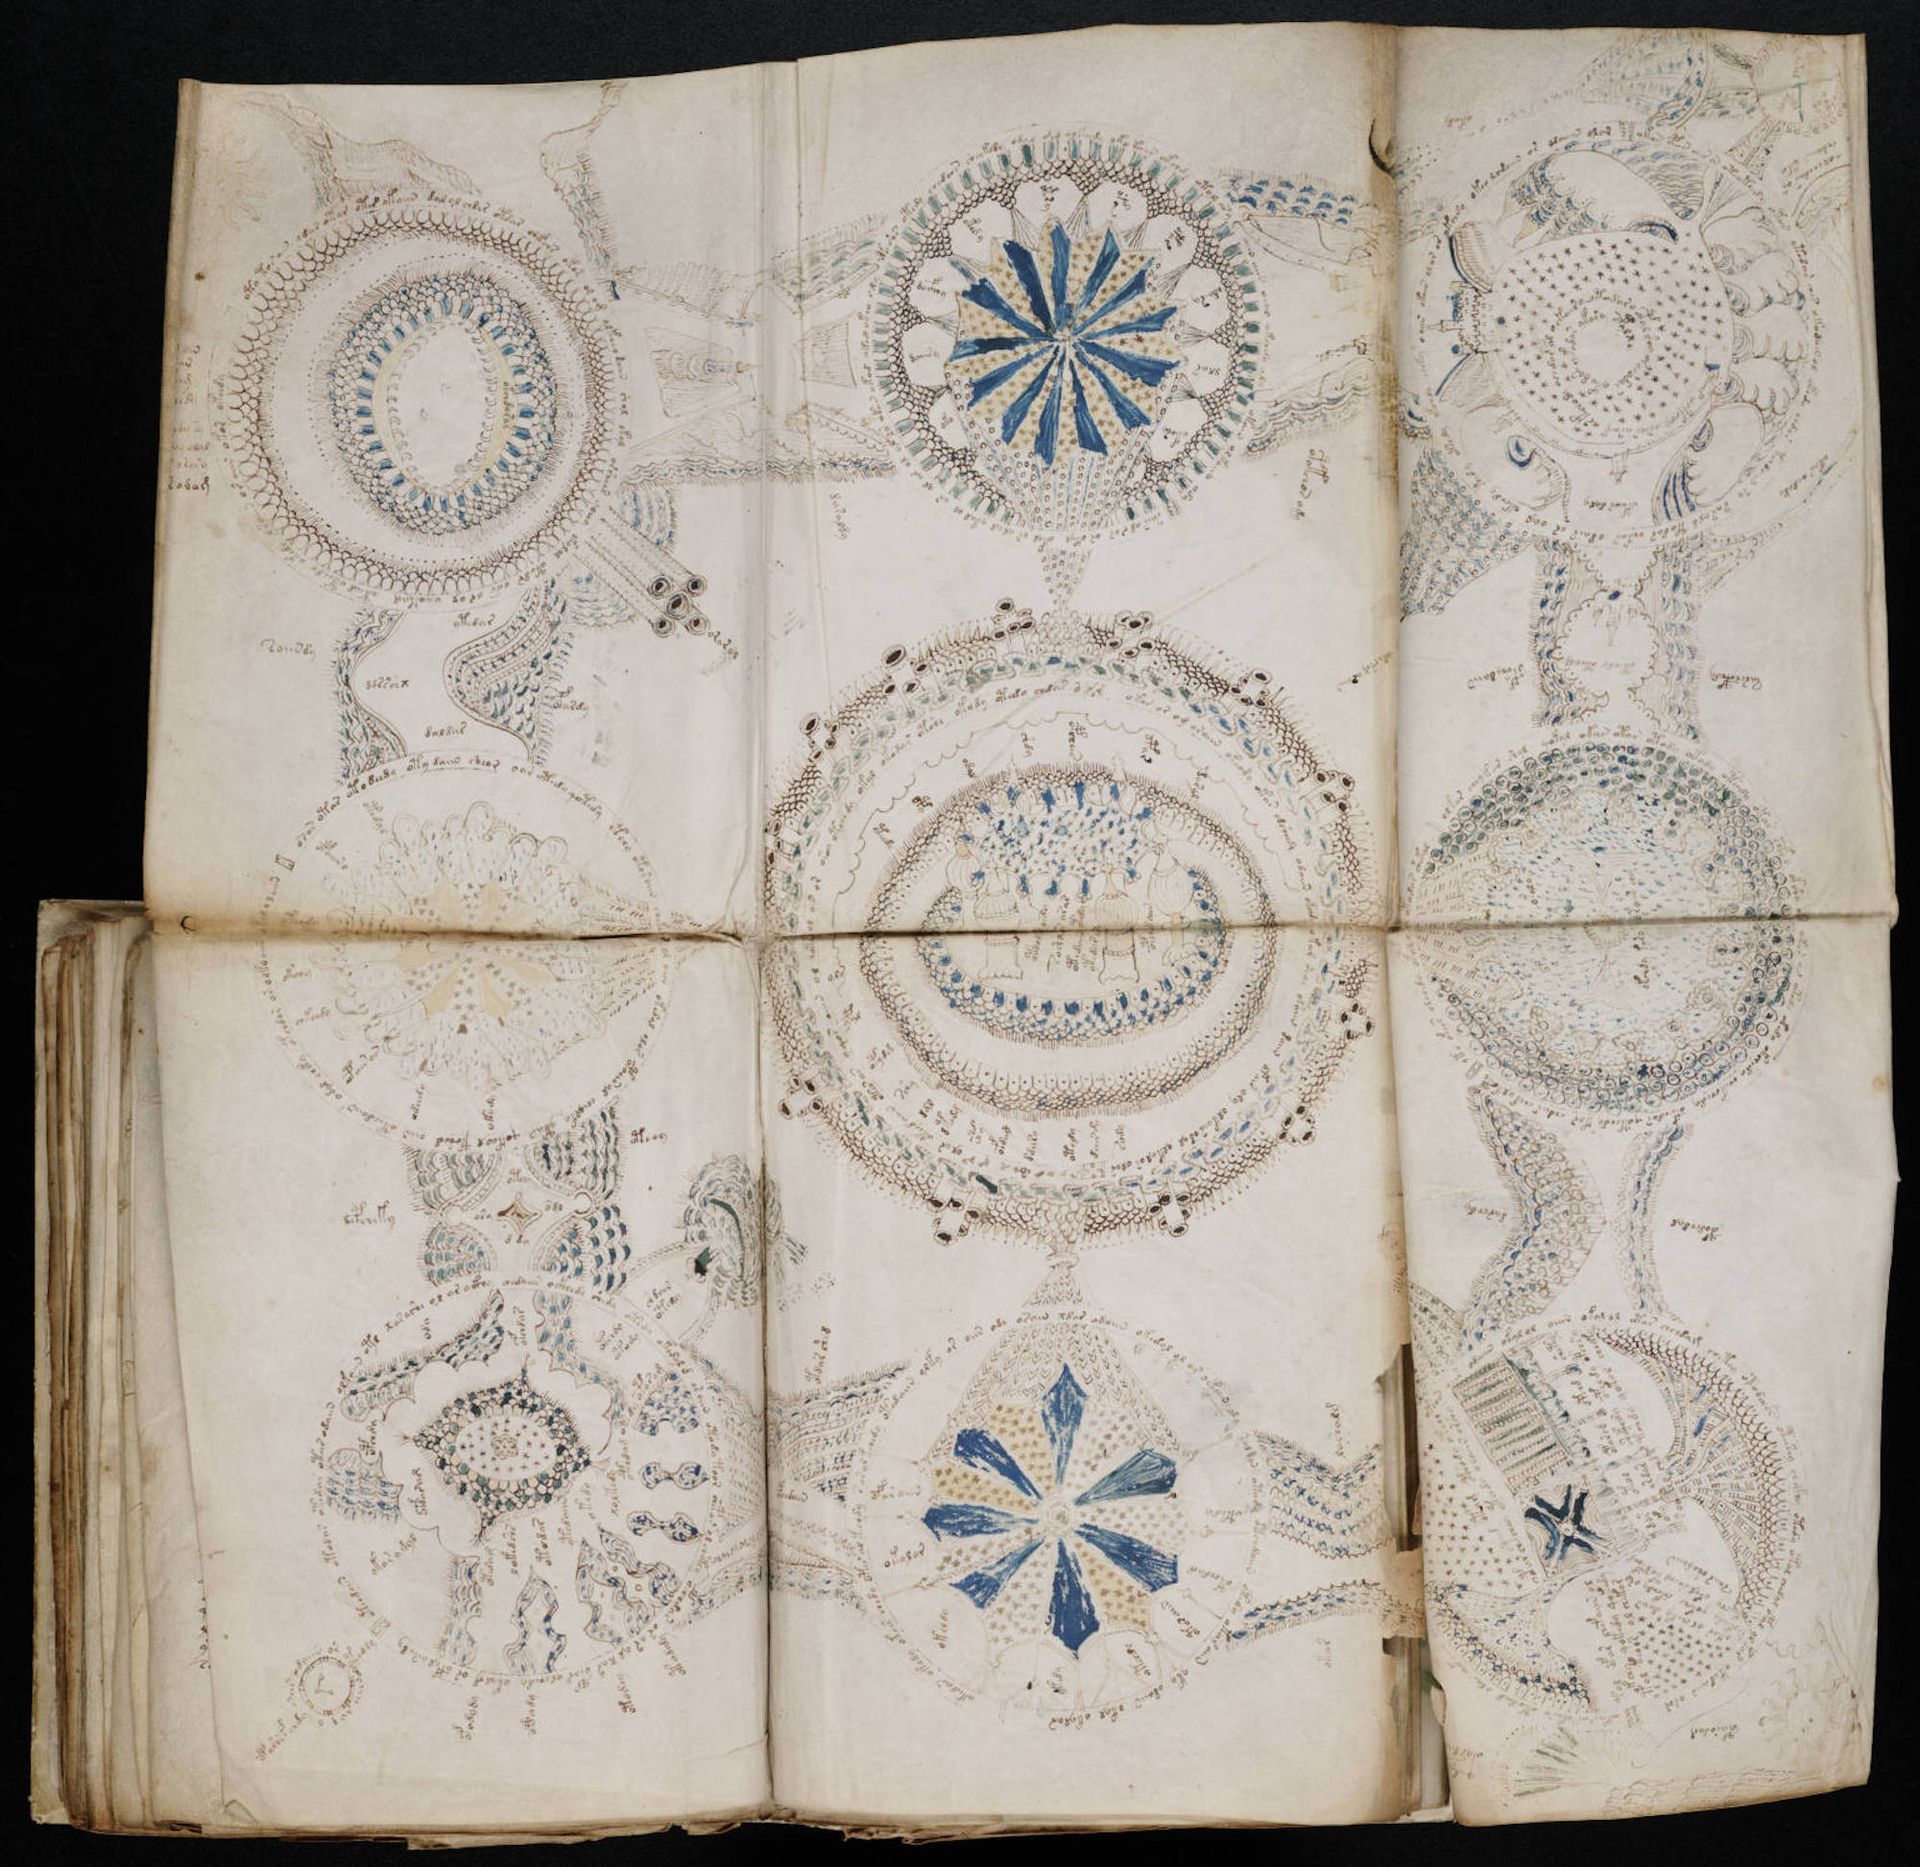 A spread from the Voynich Manuscript that folds out into an elaborate, multi-page diagram Beinecke Rare Book and Manuscript Library, Yale University, New Haven, Connecticut